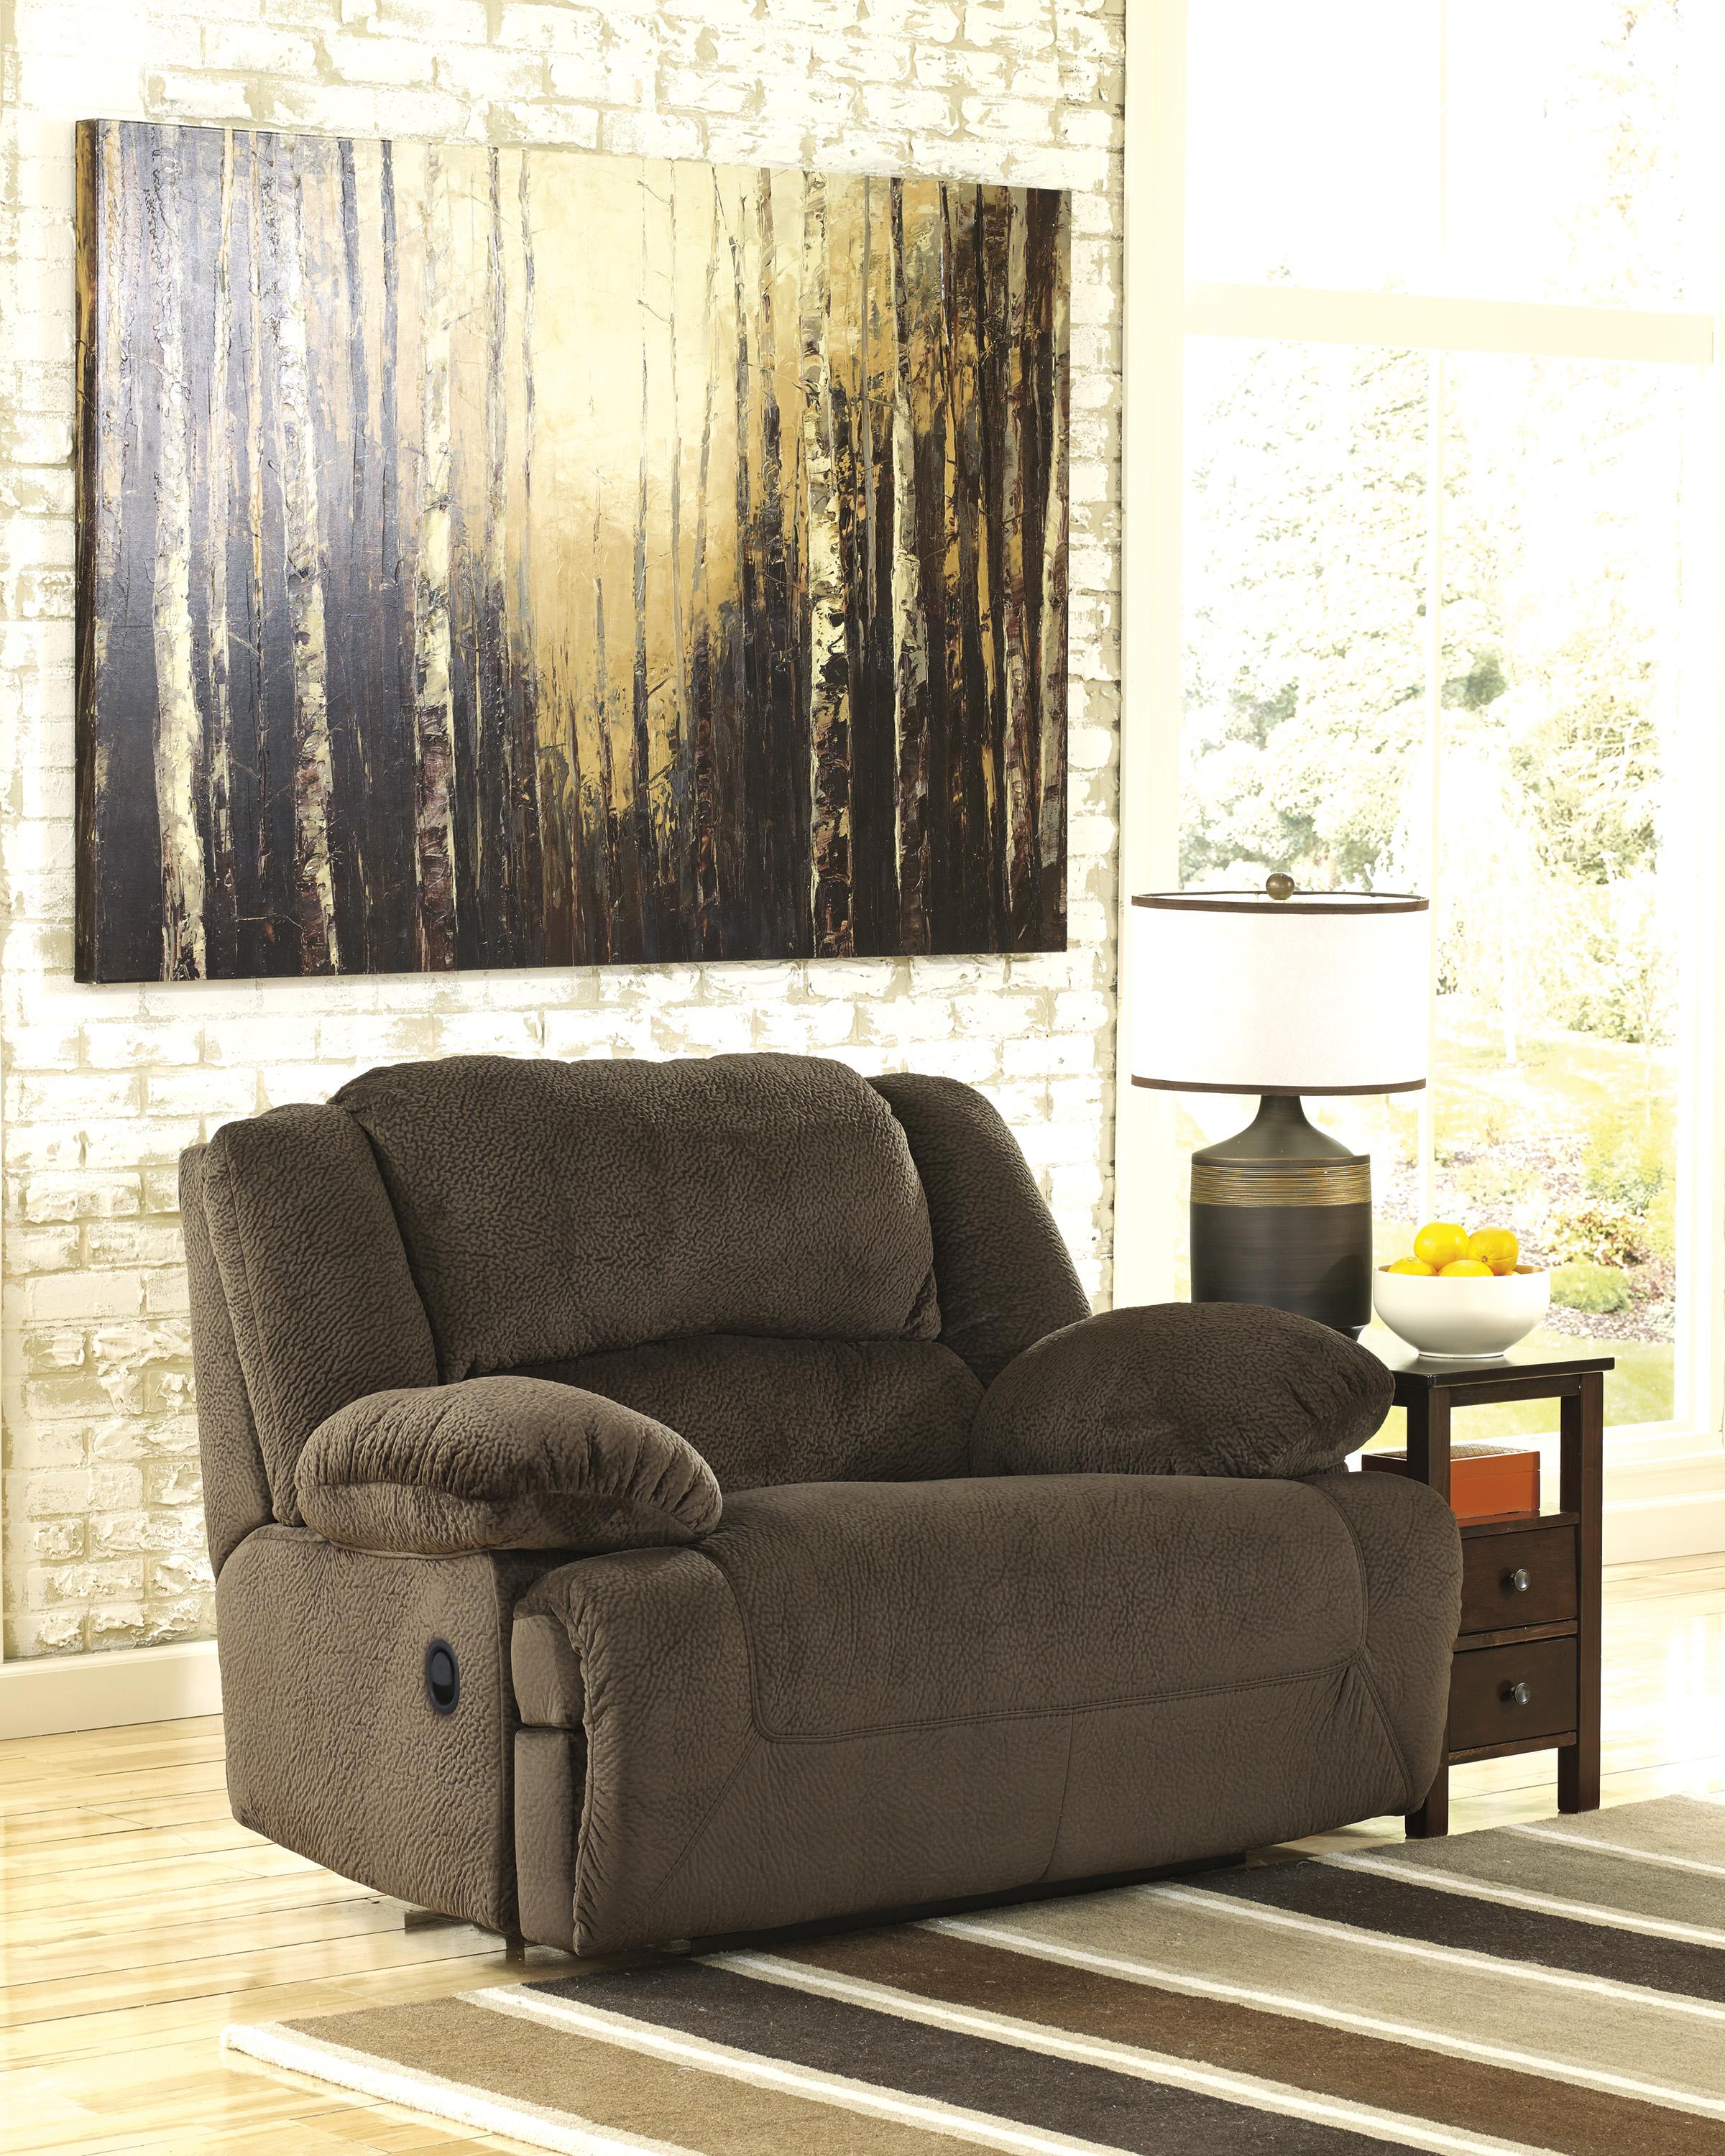 

    
56701-81-86-52-KIT Ashley Toletta 3 Piece Living Room Set in Chocolate Non Power Contemporary Style
